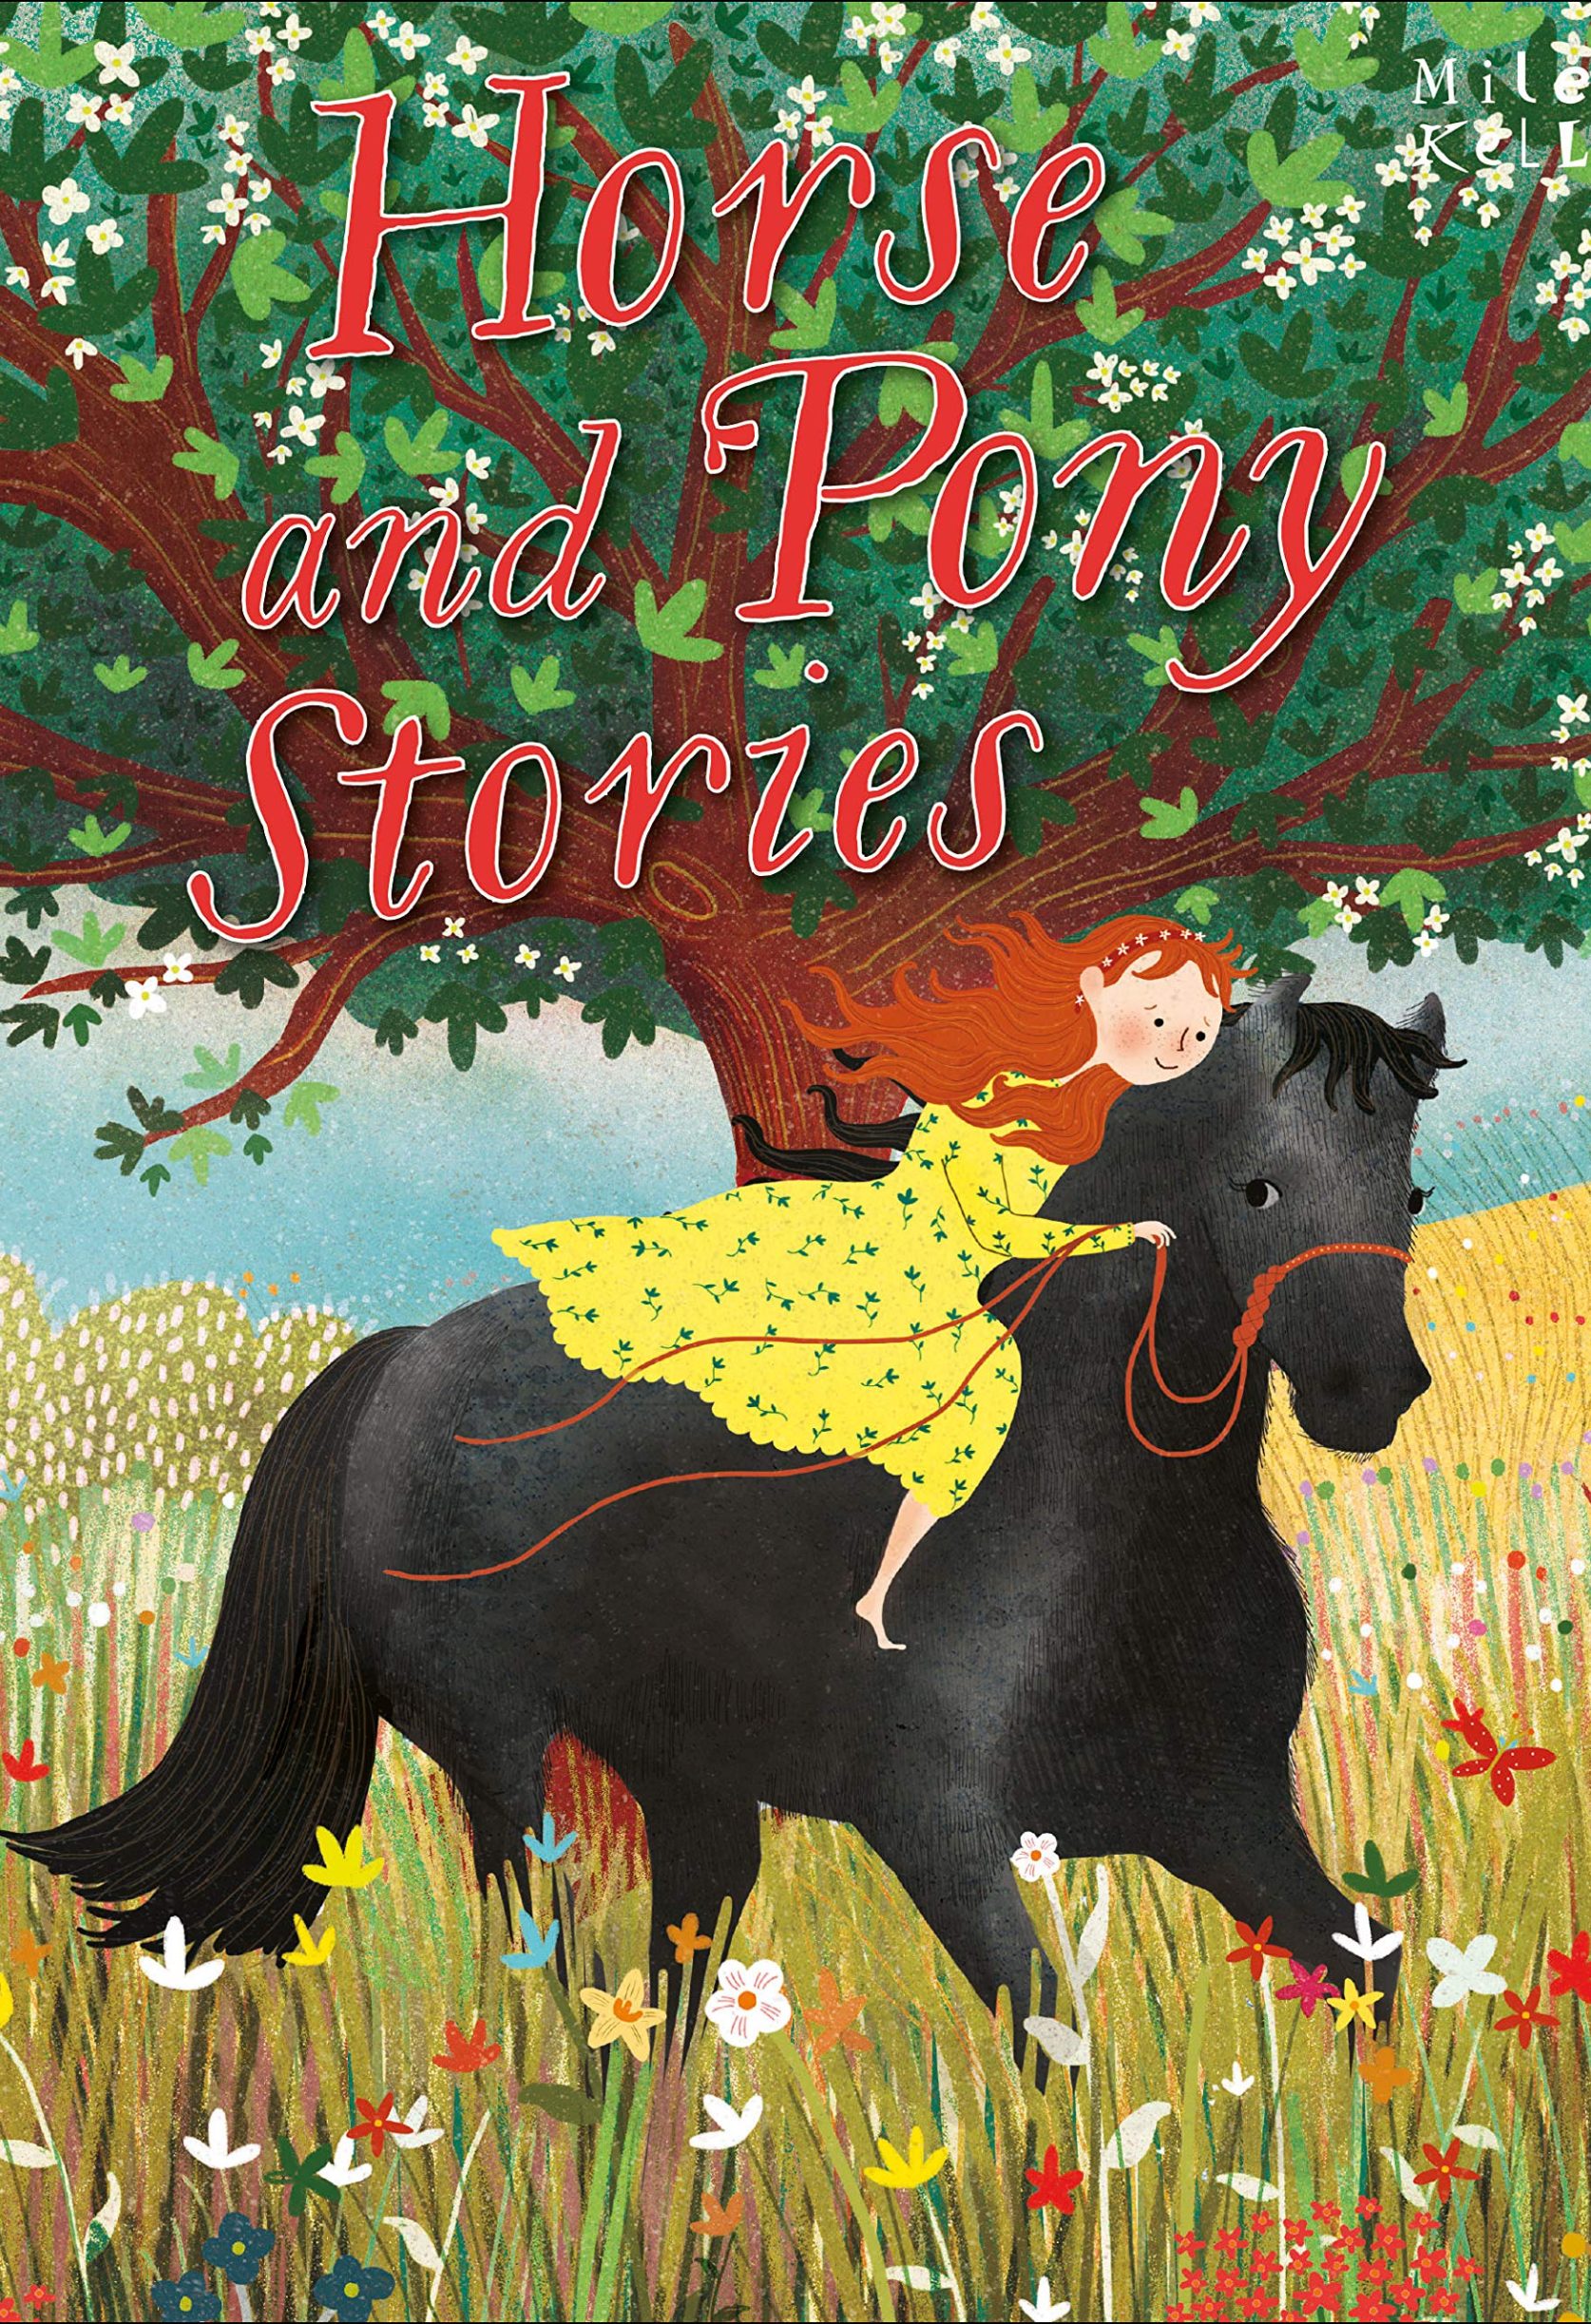 HORSE AND PONY STORIES